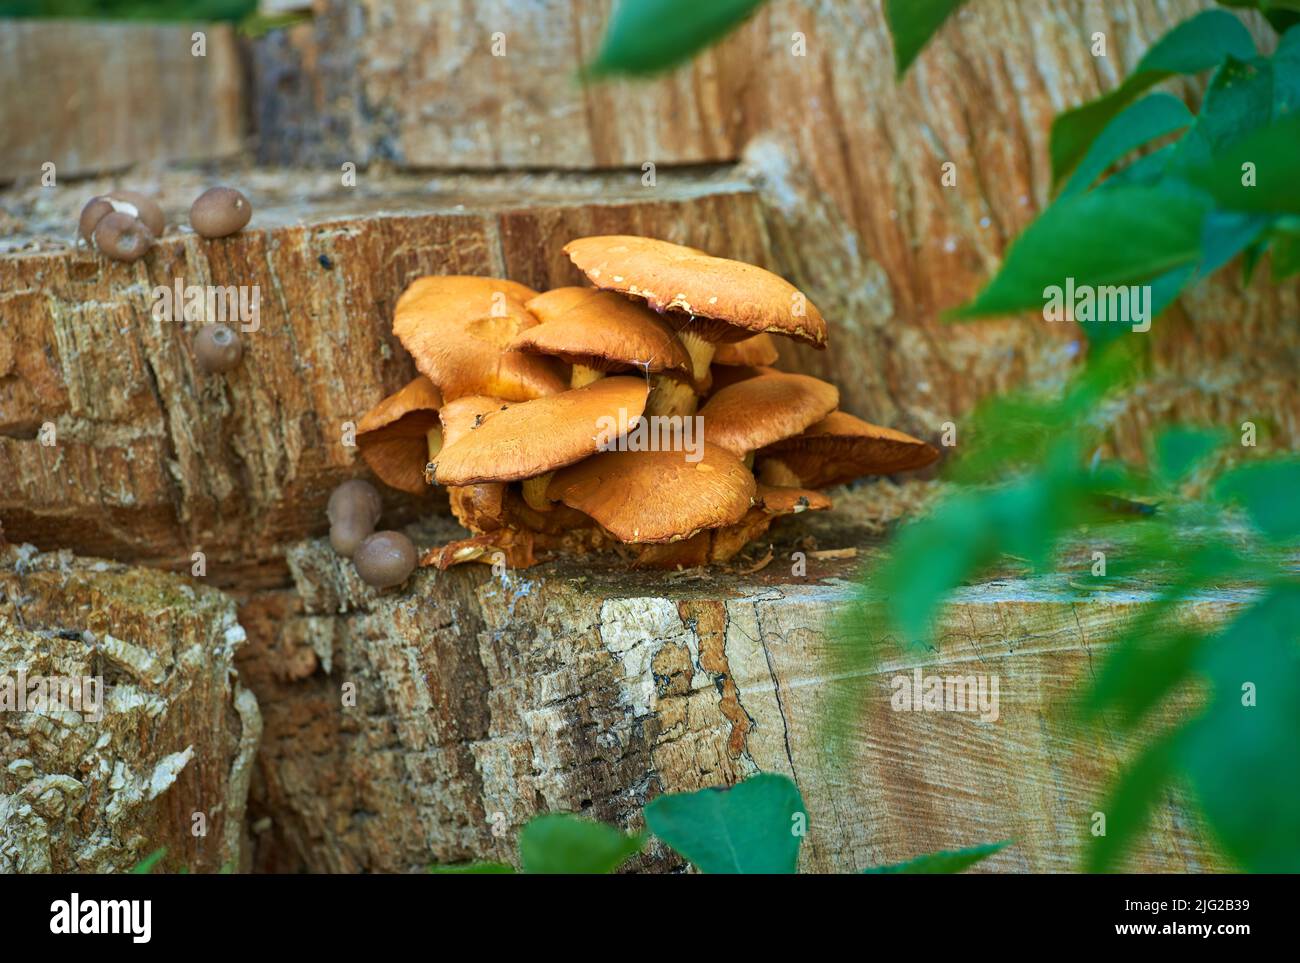 Closeup of wild porcini mushrooms growing on a tree stump in an organic lush forest. Plants growing and blooming in an ecological and sustainable Stock Photo